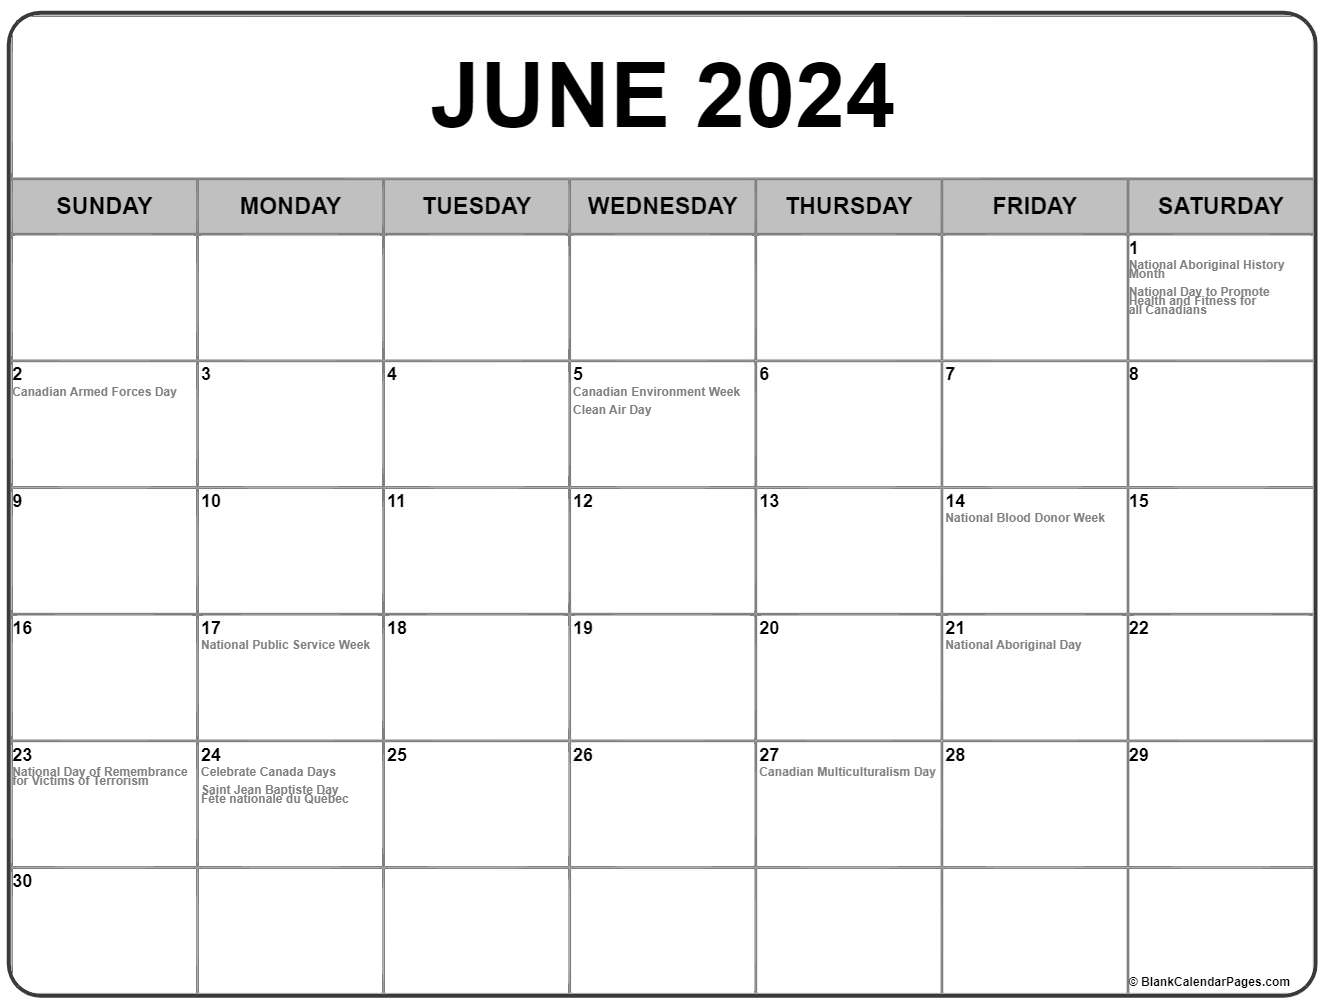 Collection of June 2020 calendars with holidays